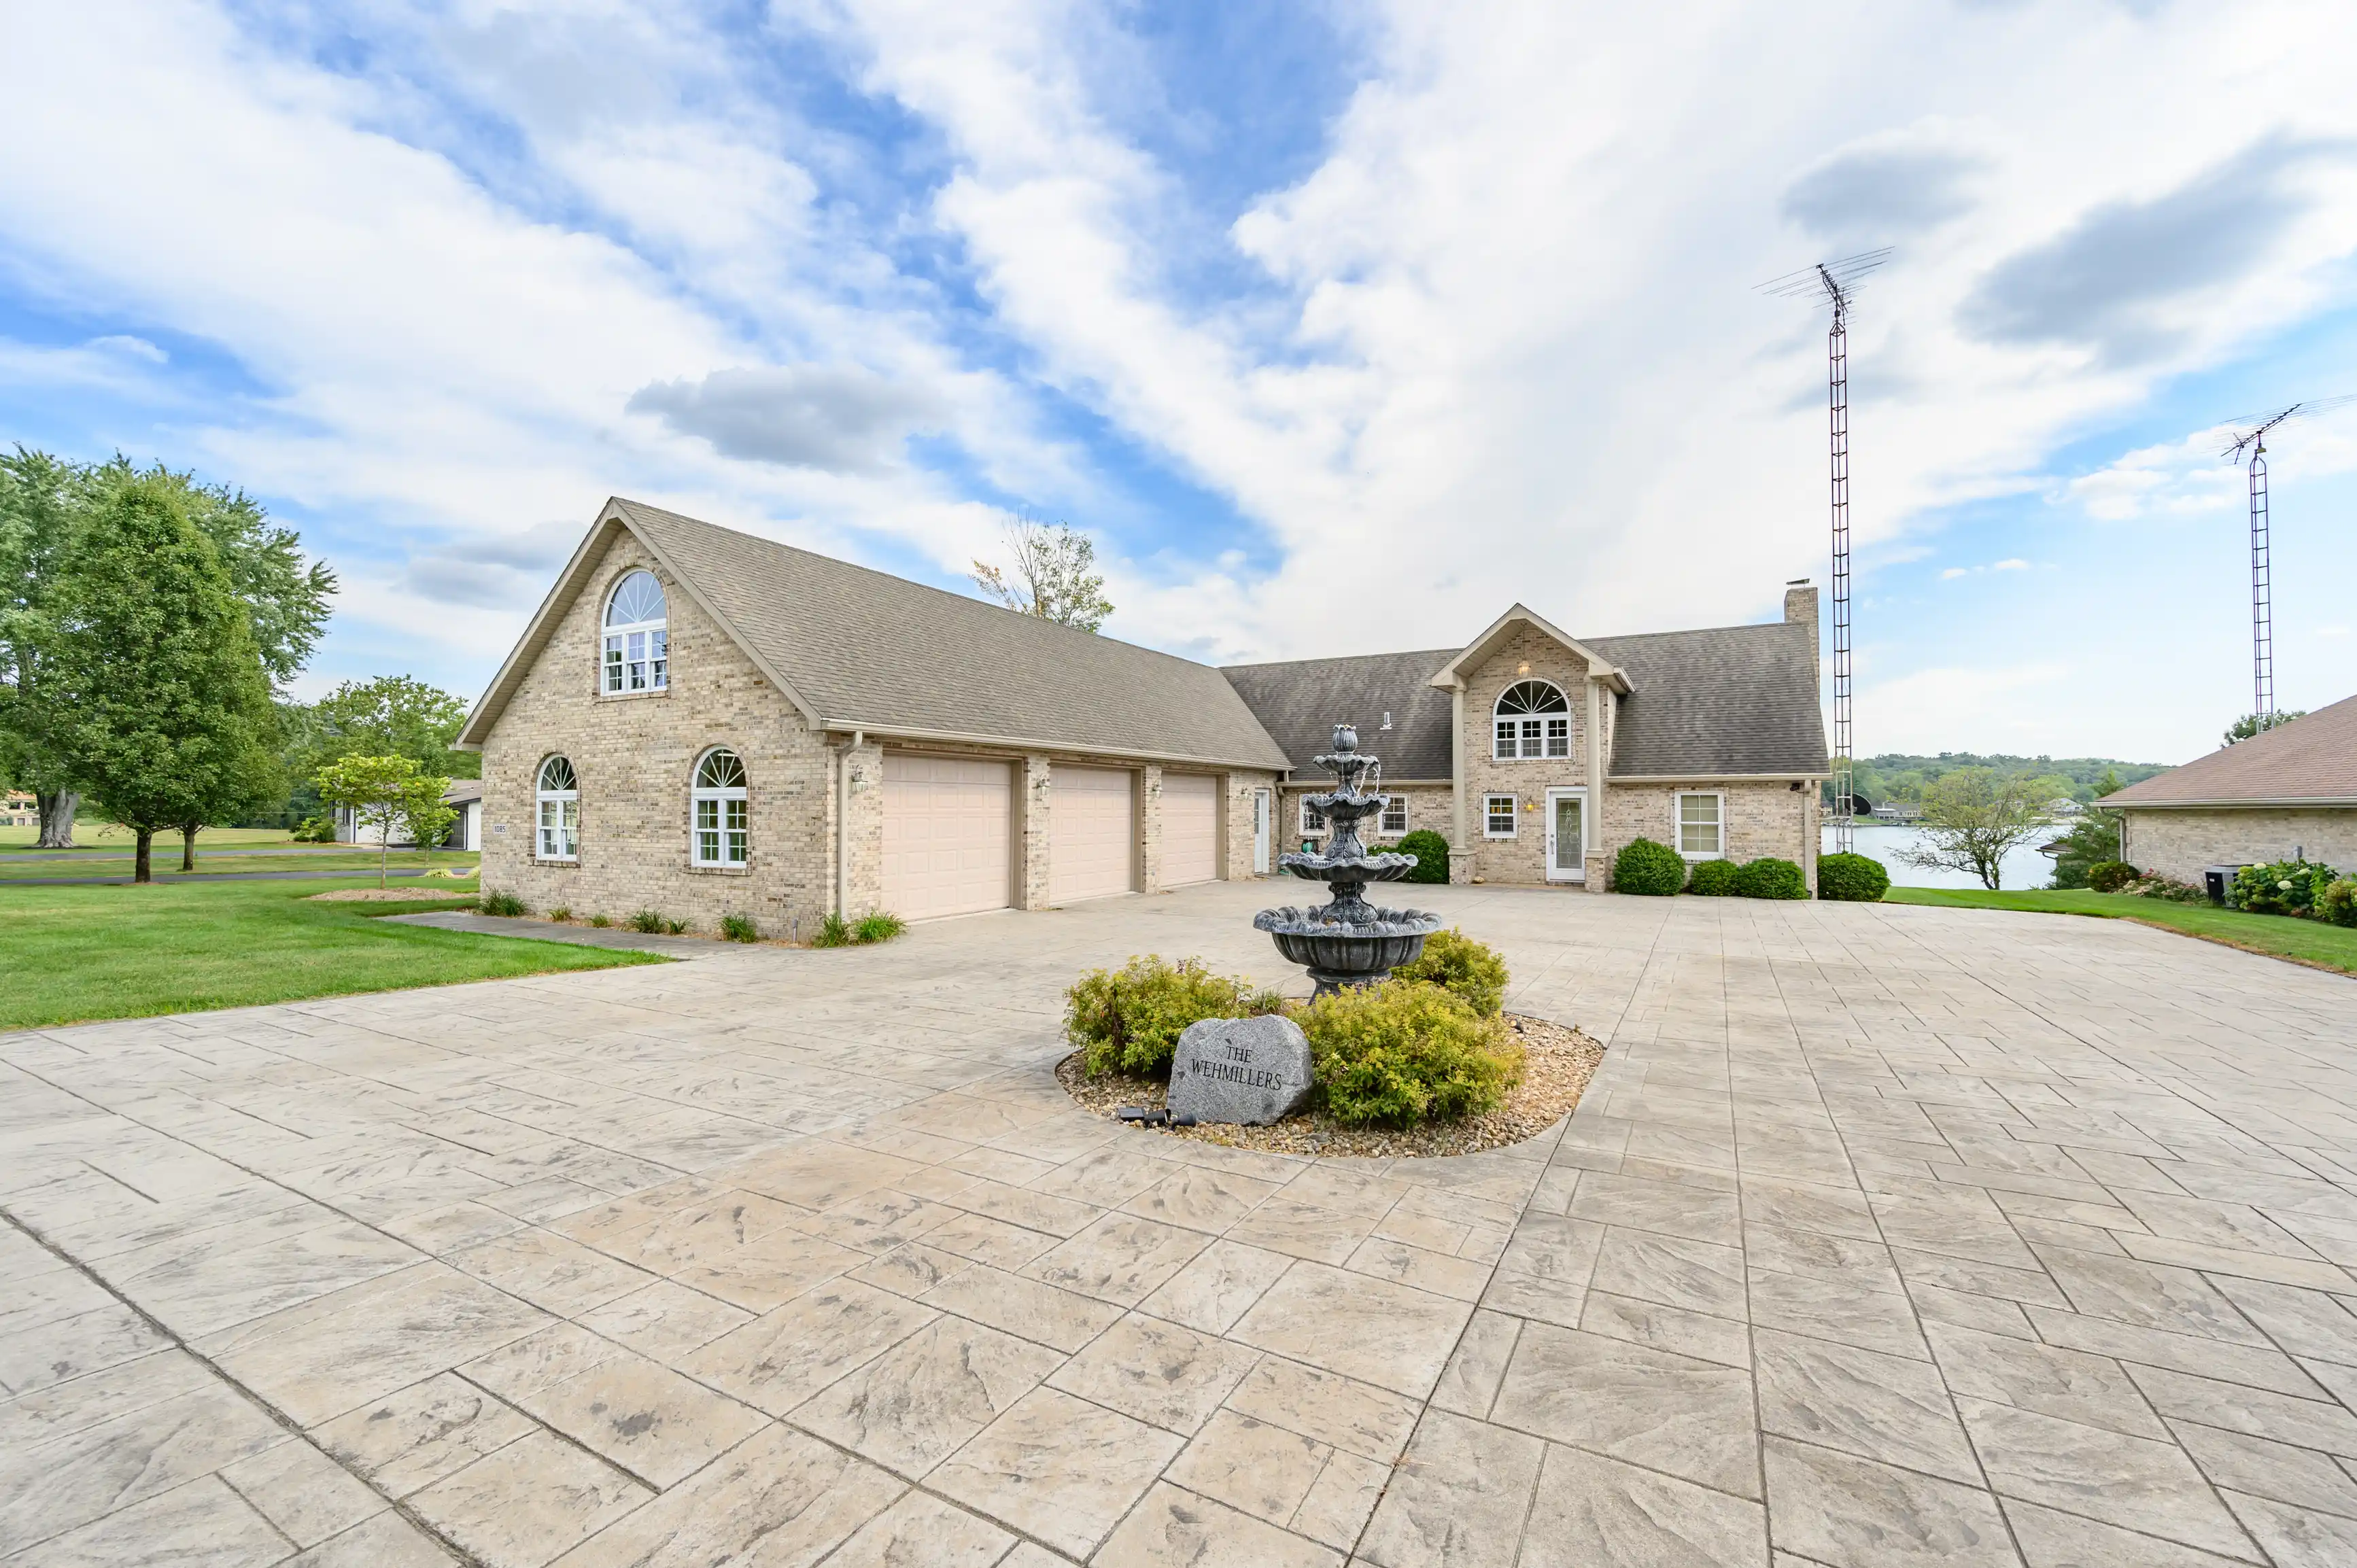 Spacious single-family home with stone facade and attached three-car garage, featuring a large paved driveway and central fountain in a landscaped front yard, set against a partly cloudy sky with antennas in the background and a view of a water body behind the property.